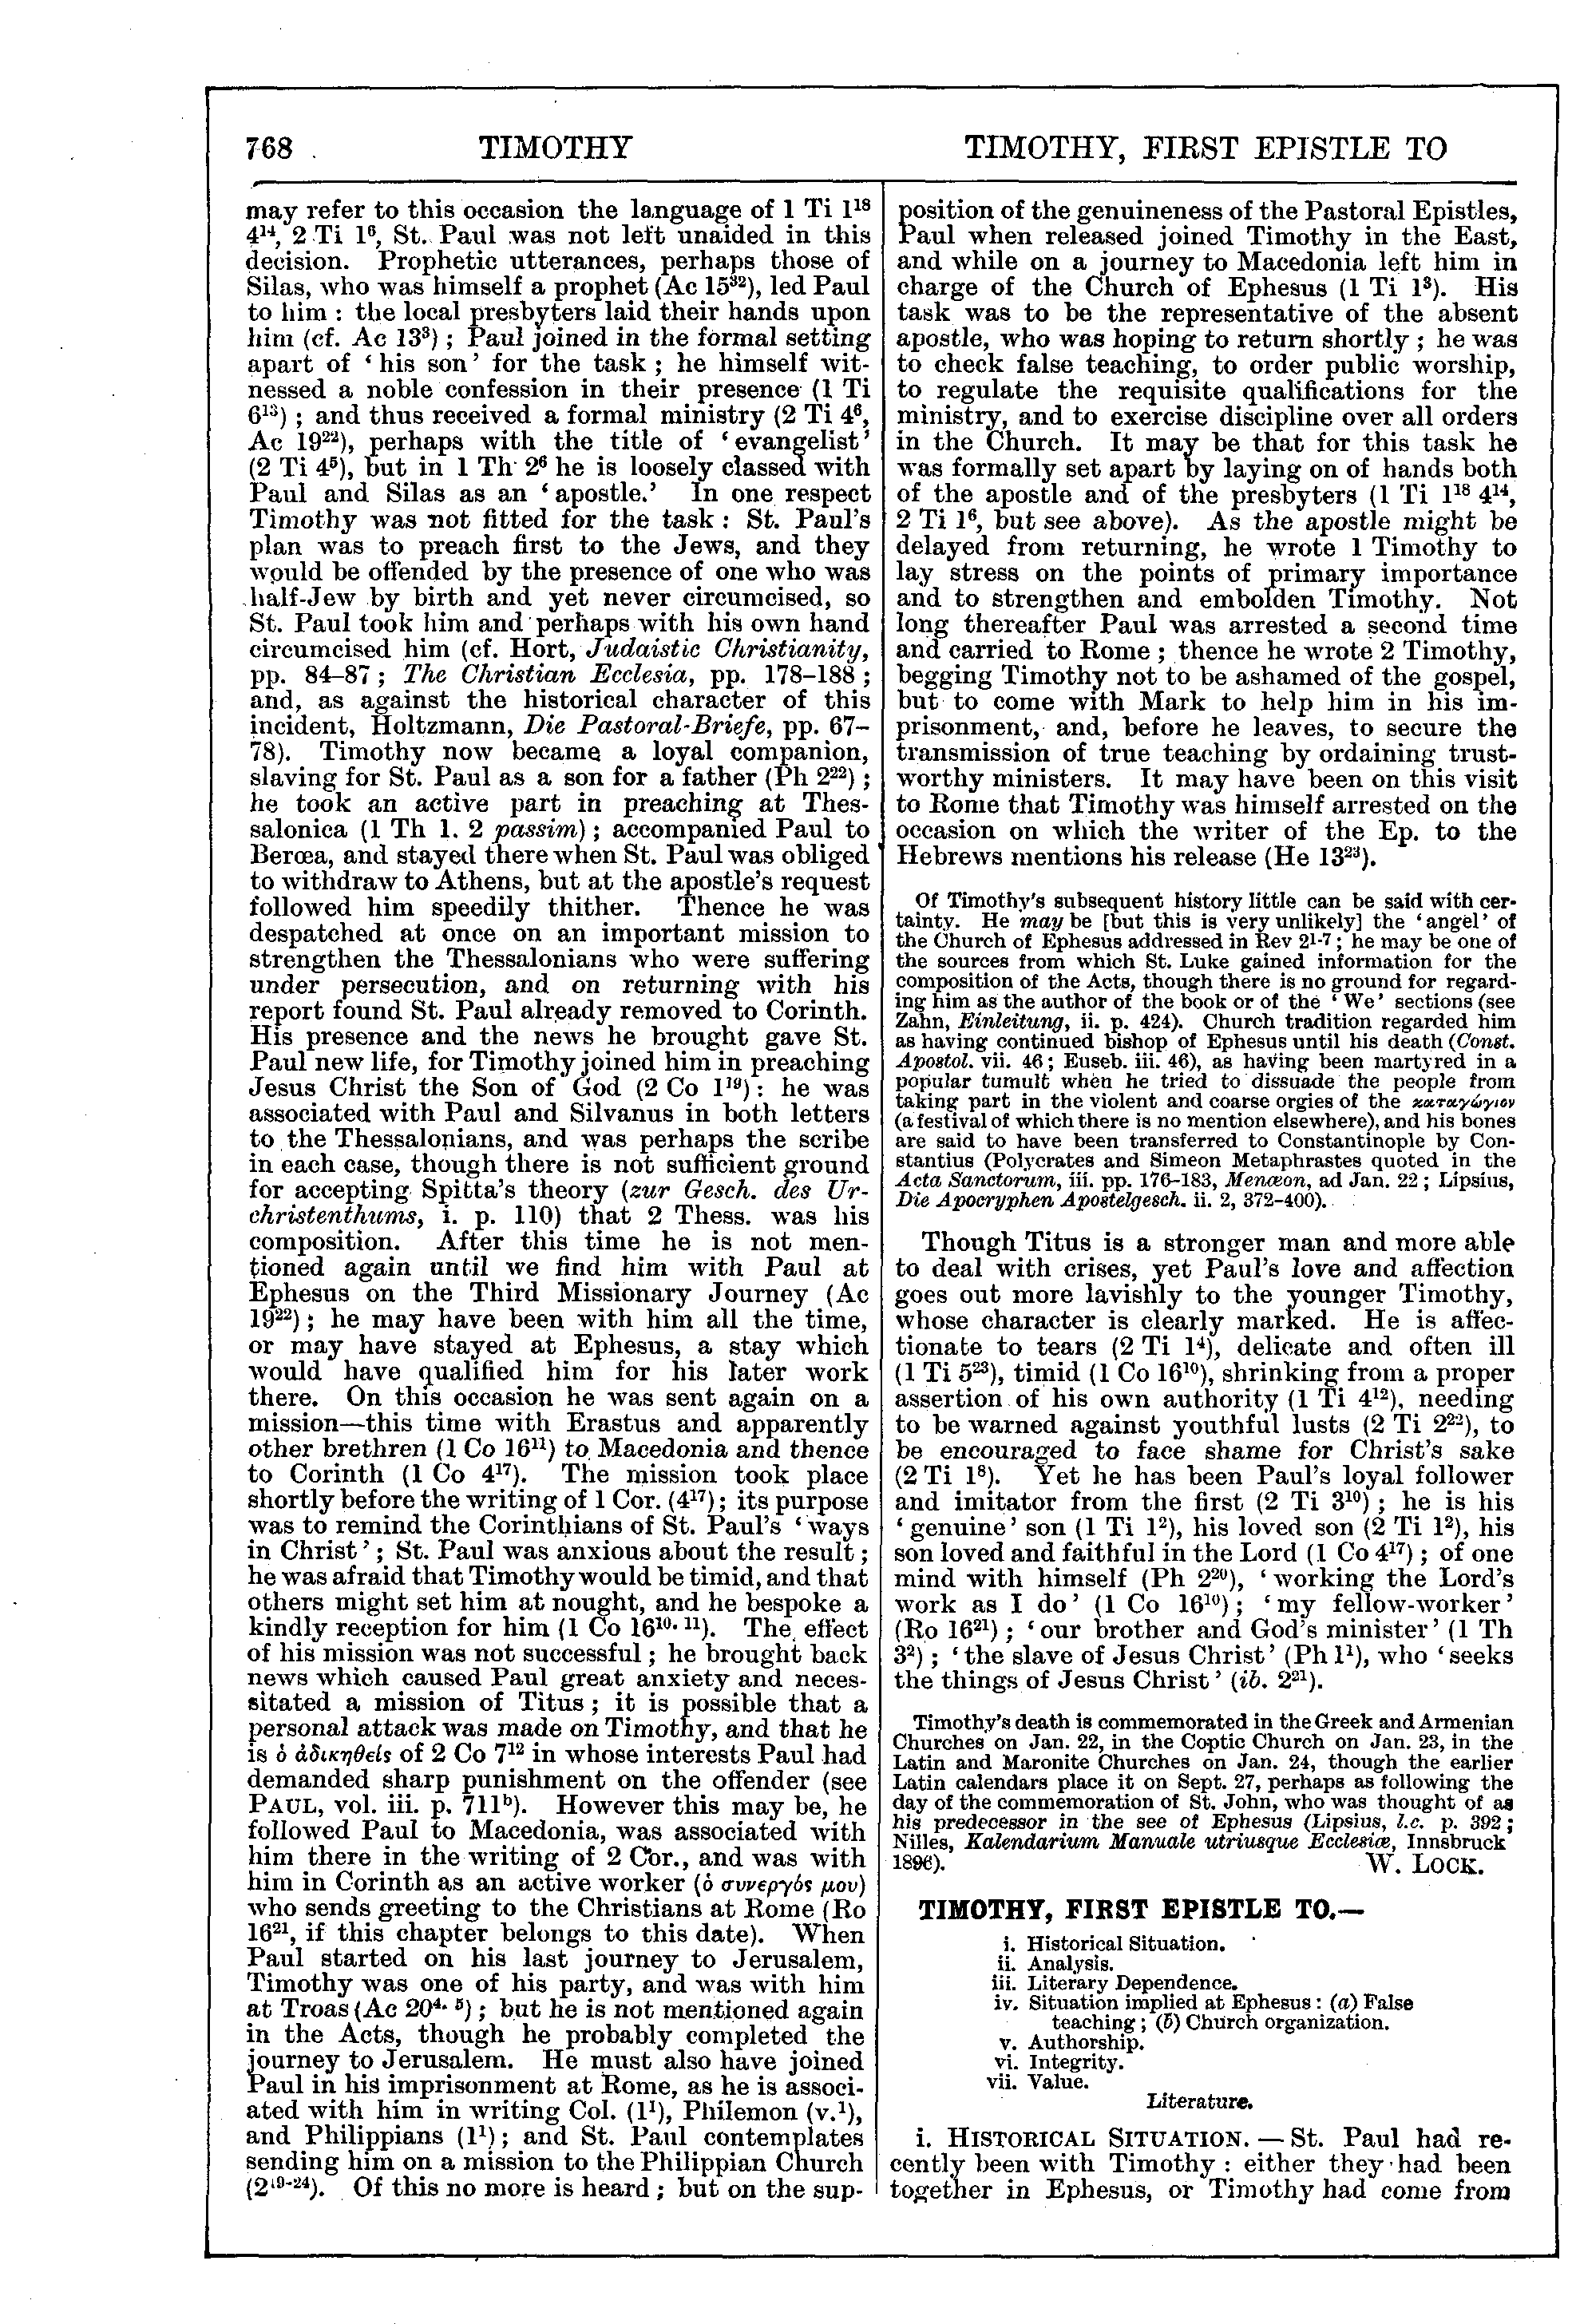 Image of page 768